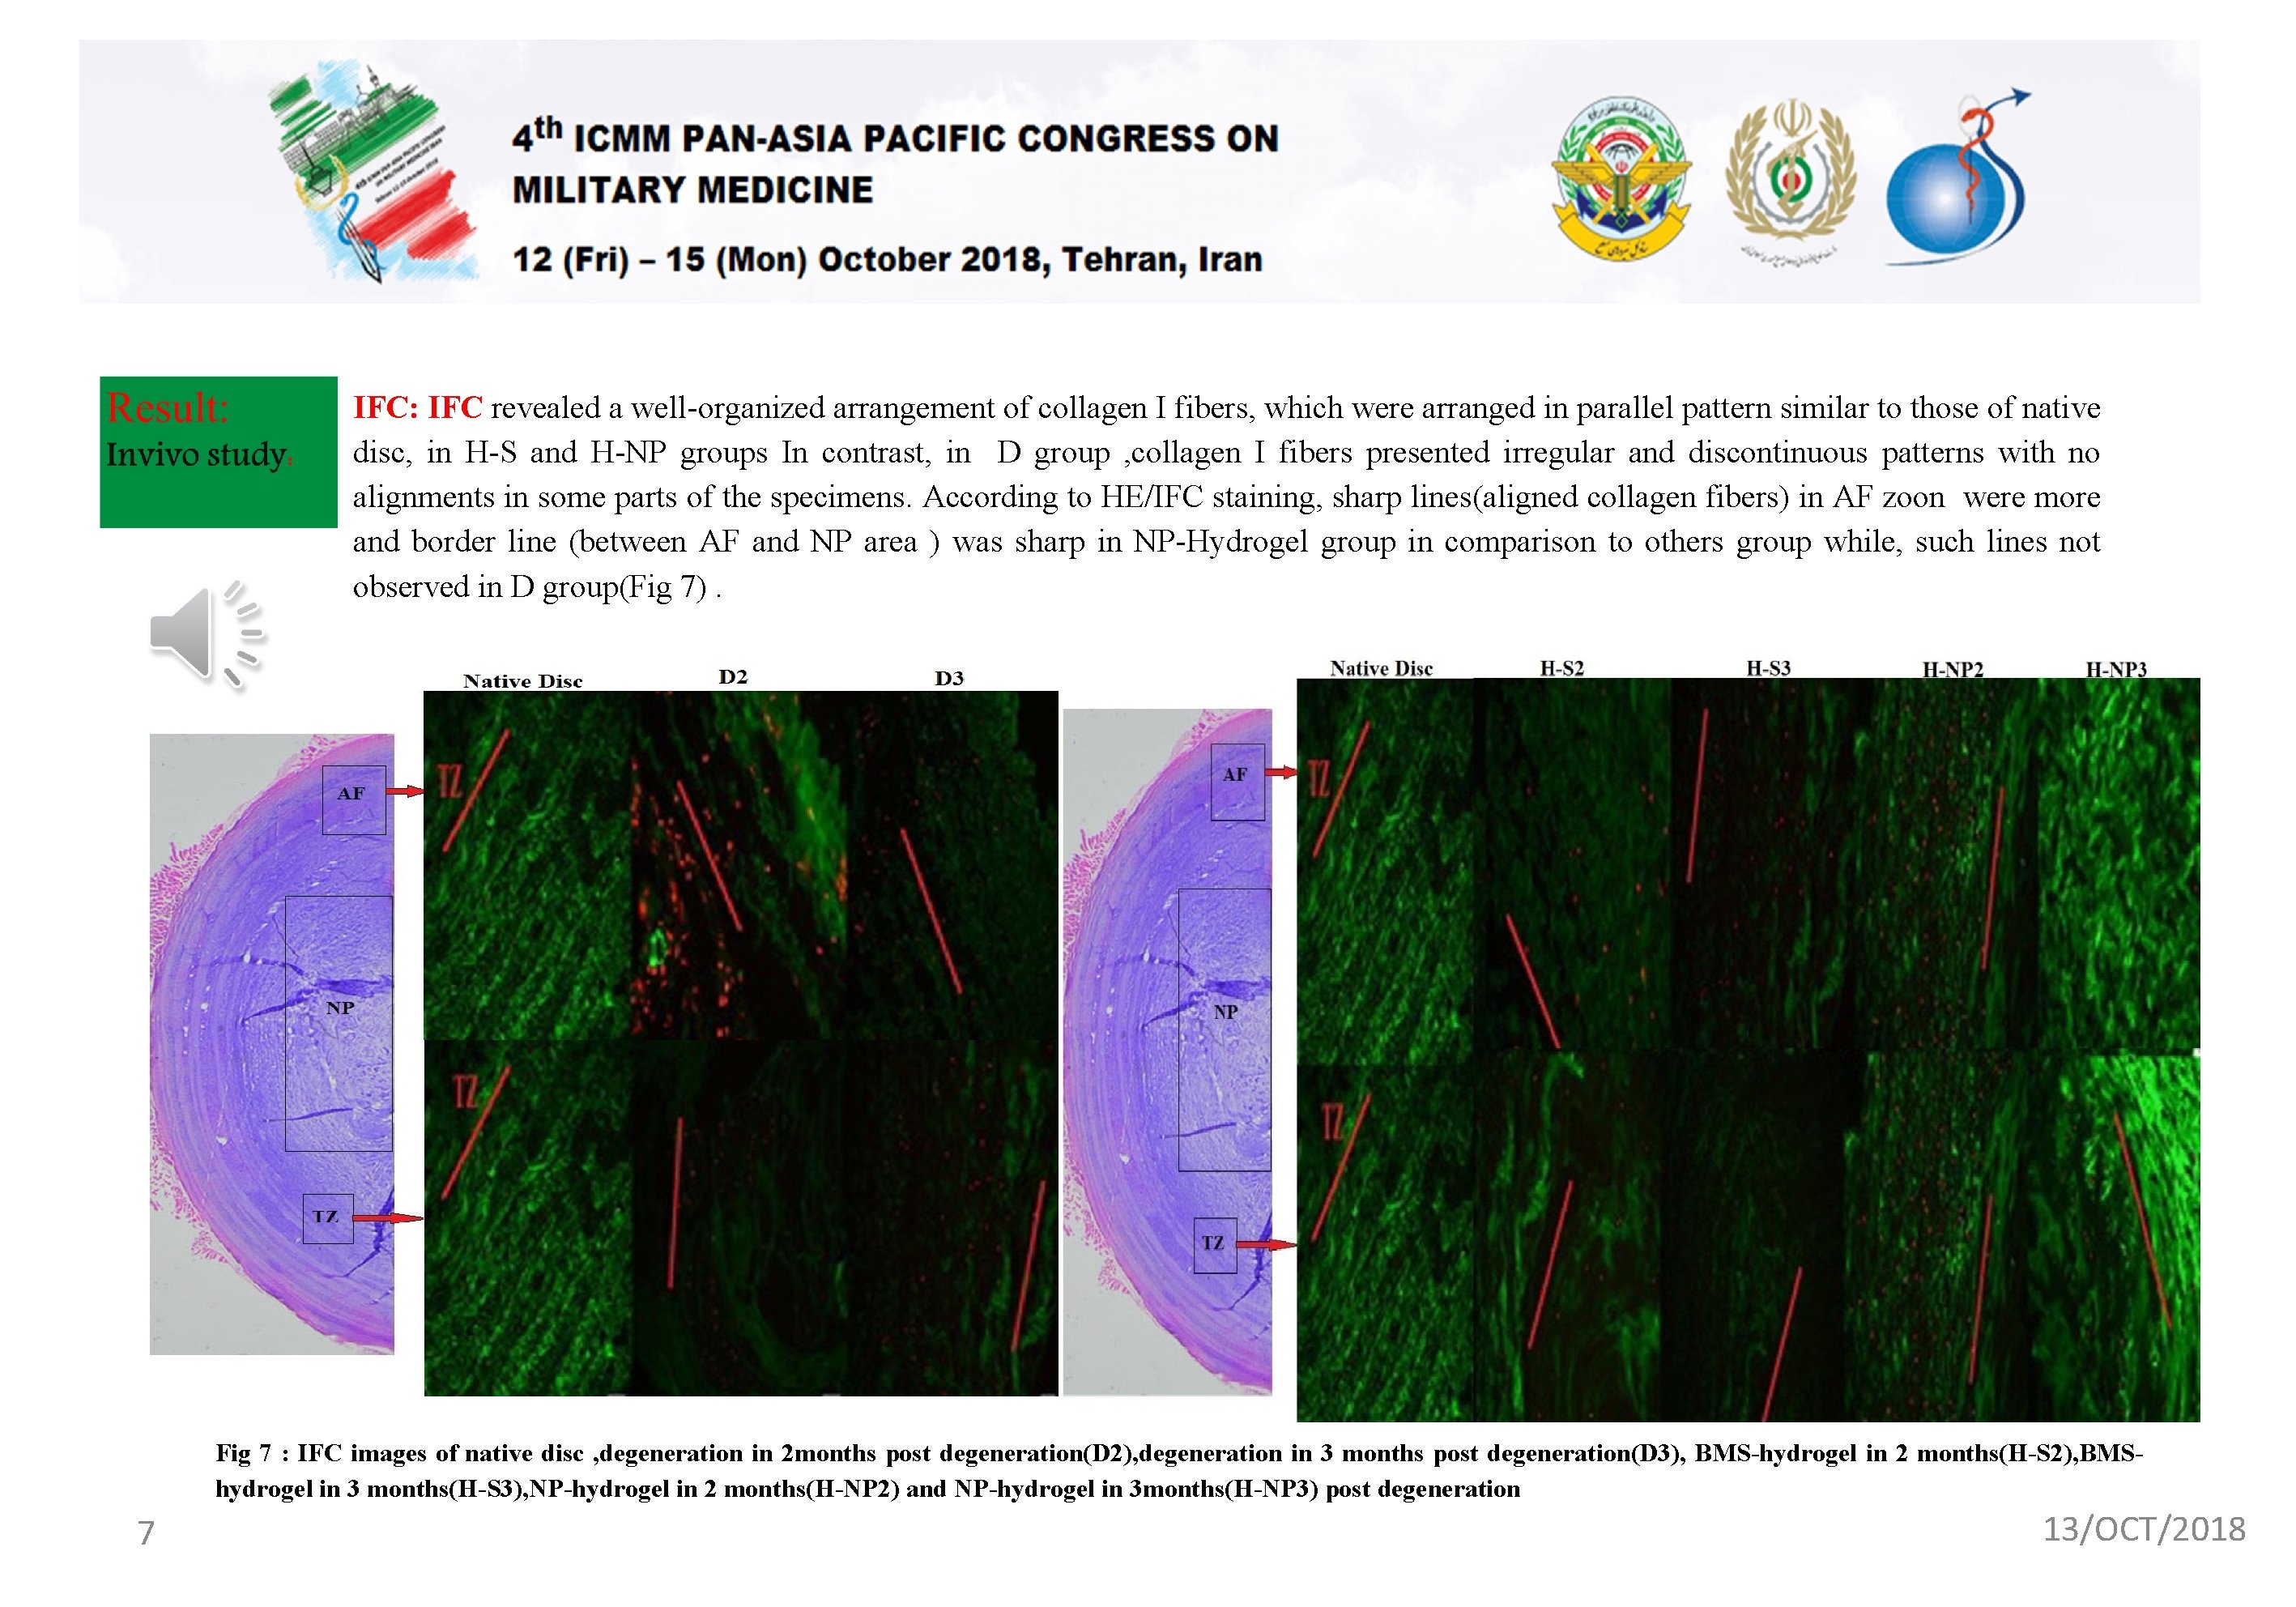 IFC: IFC revealed a well-organized arrangement of collagen I fibers, which were arranged in